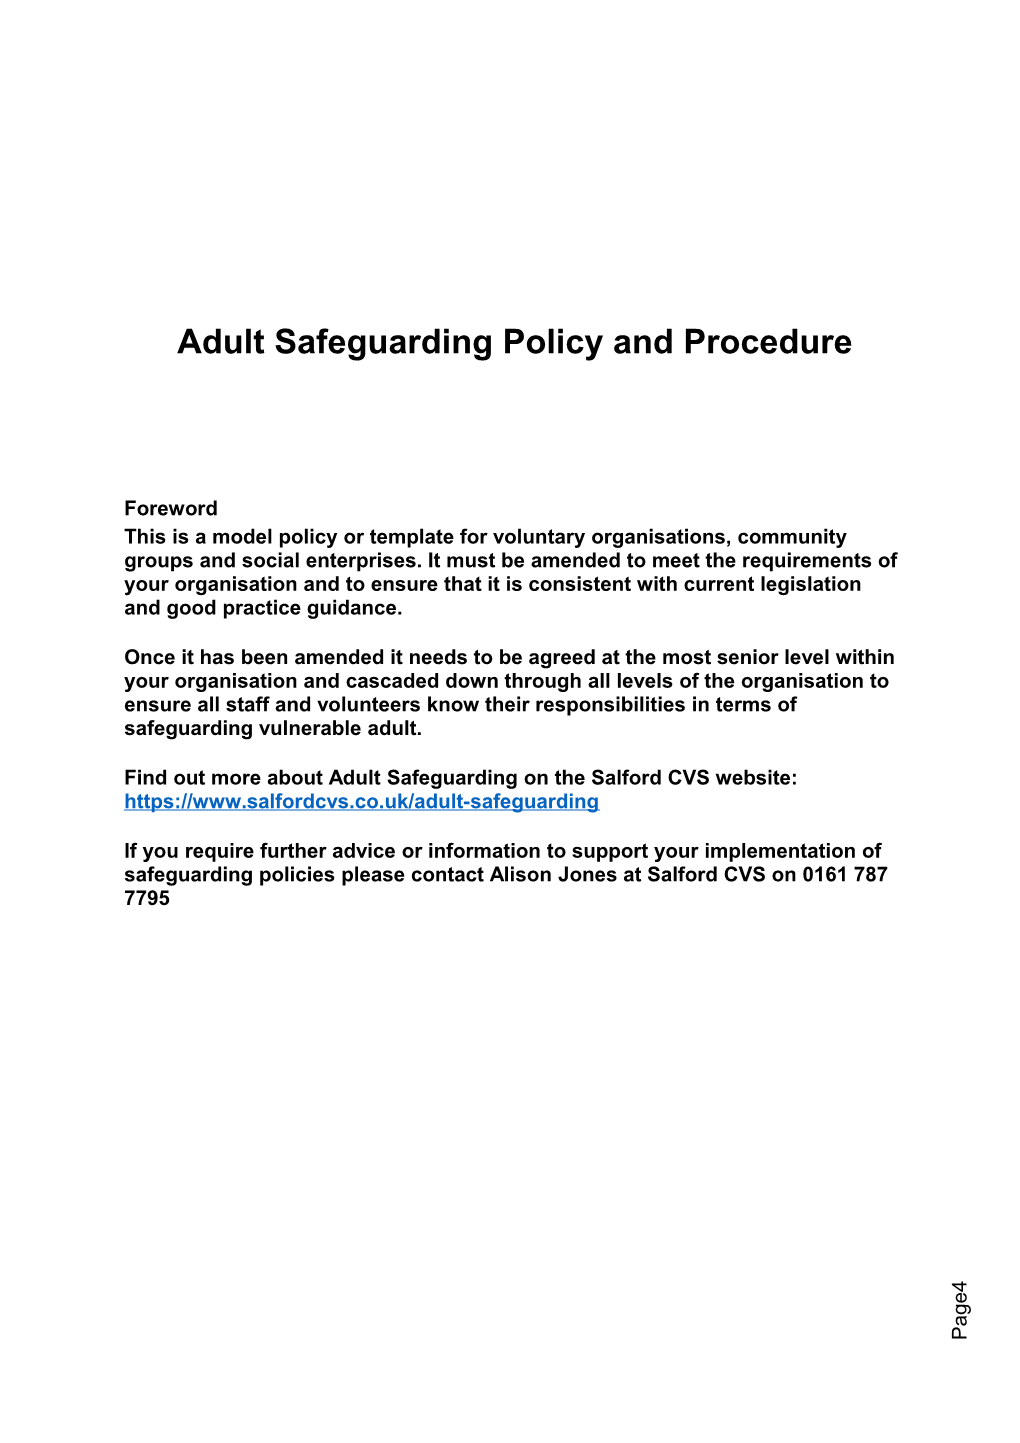 Adult Safeguarding Policy and Procedure